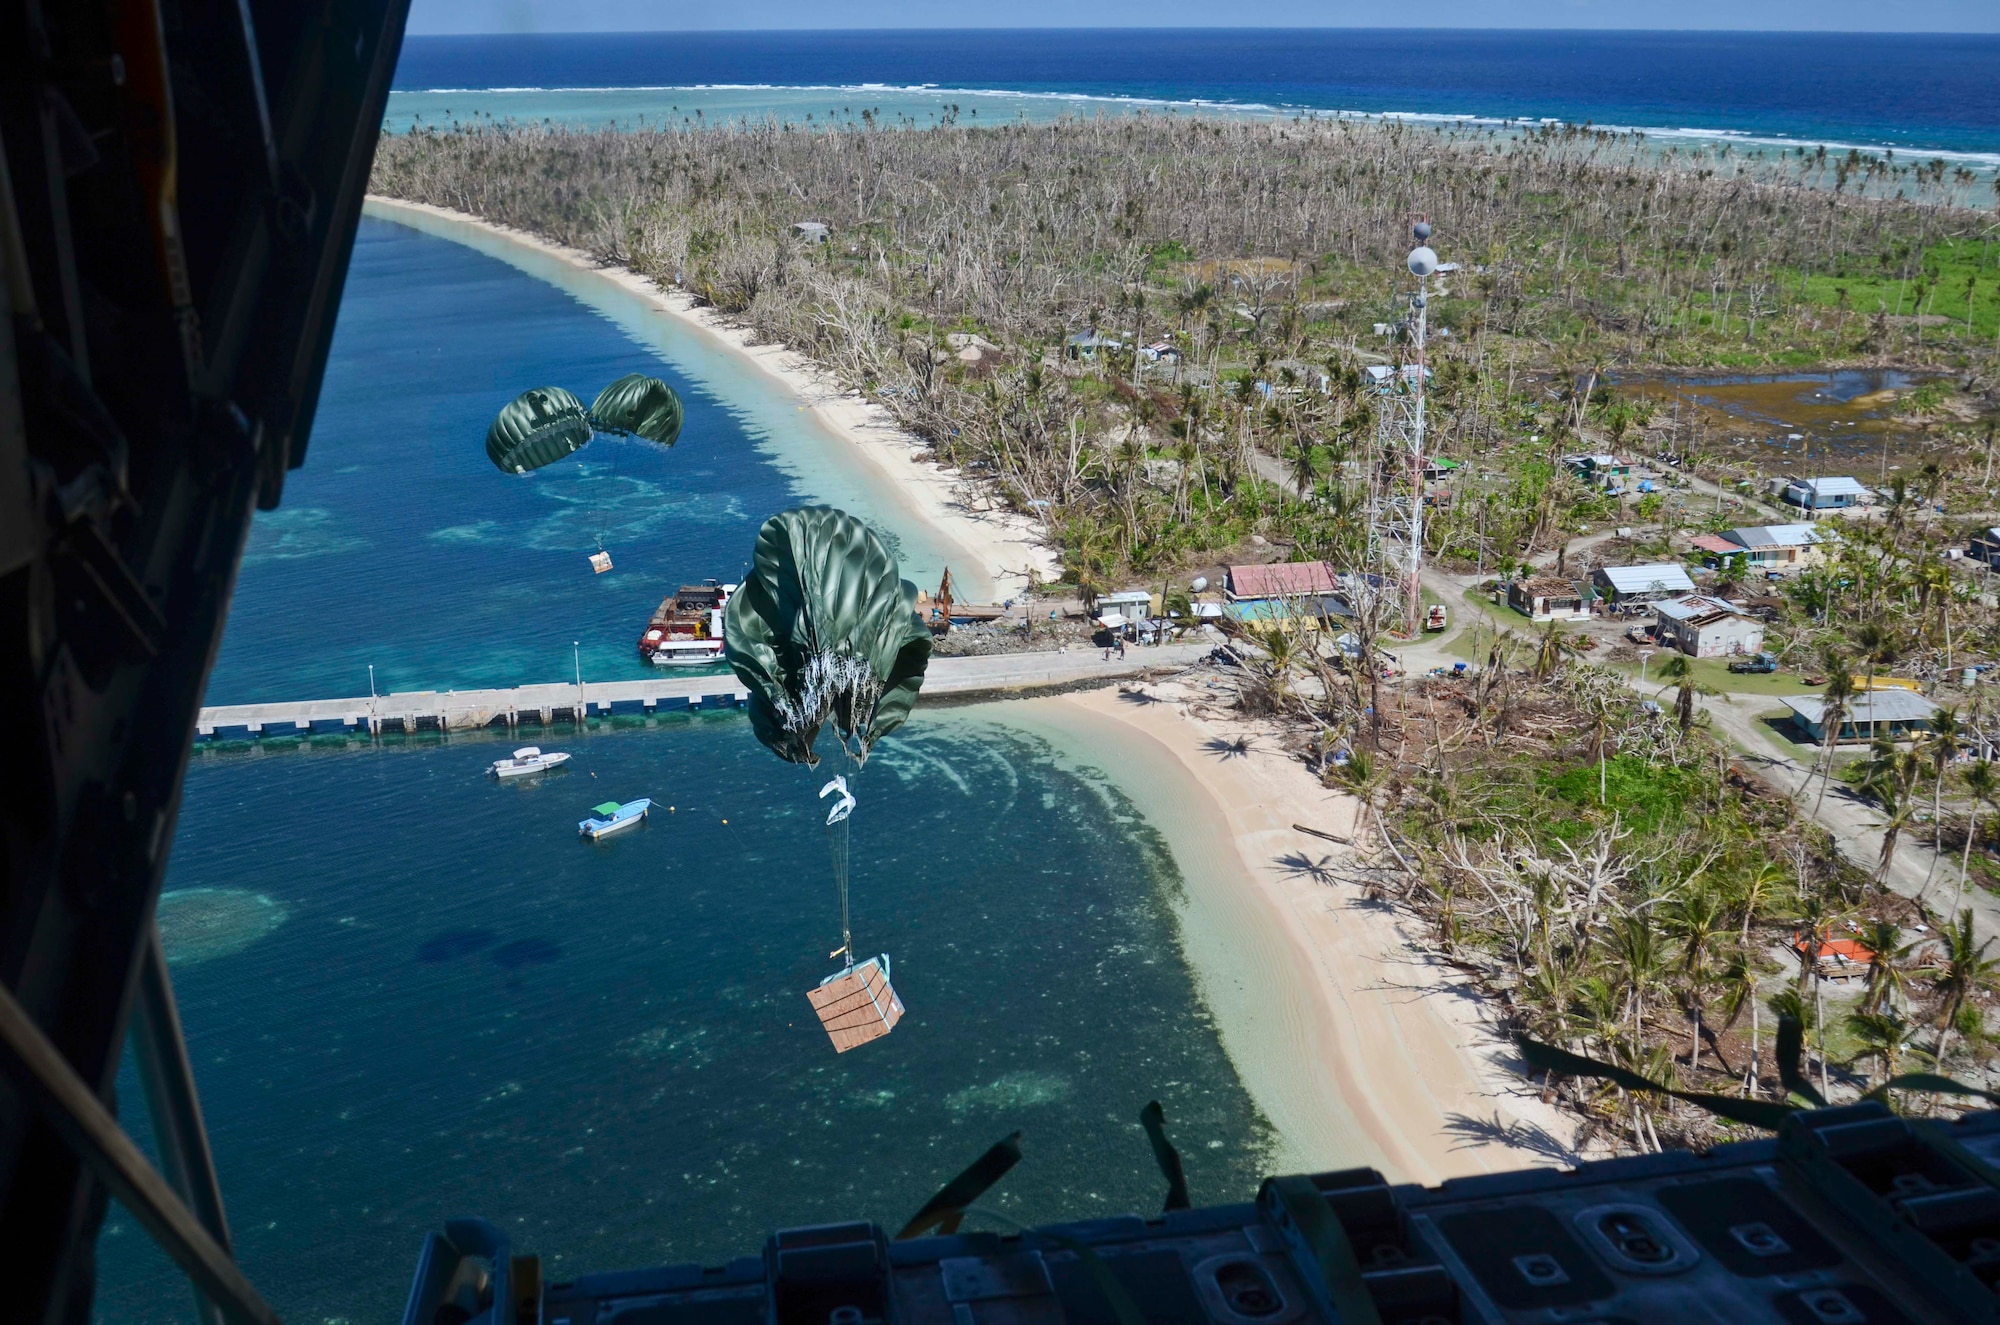 Packages make their way to the shore of Kayangel Island during an Operation Christmas Drop mission over the Pacific Ocean Dec. 11, 2013. The Island of Kayangel also experienced the devastating effects of Typhoon Haiyan that ravaged the Philippines and other island in the area. (U.S. Air Force photo/Senior Airman Marianique Santos) 

